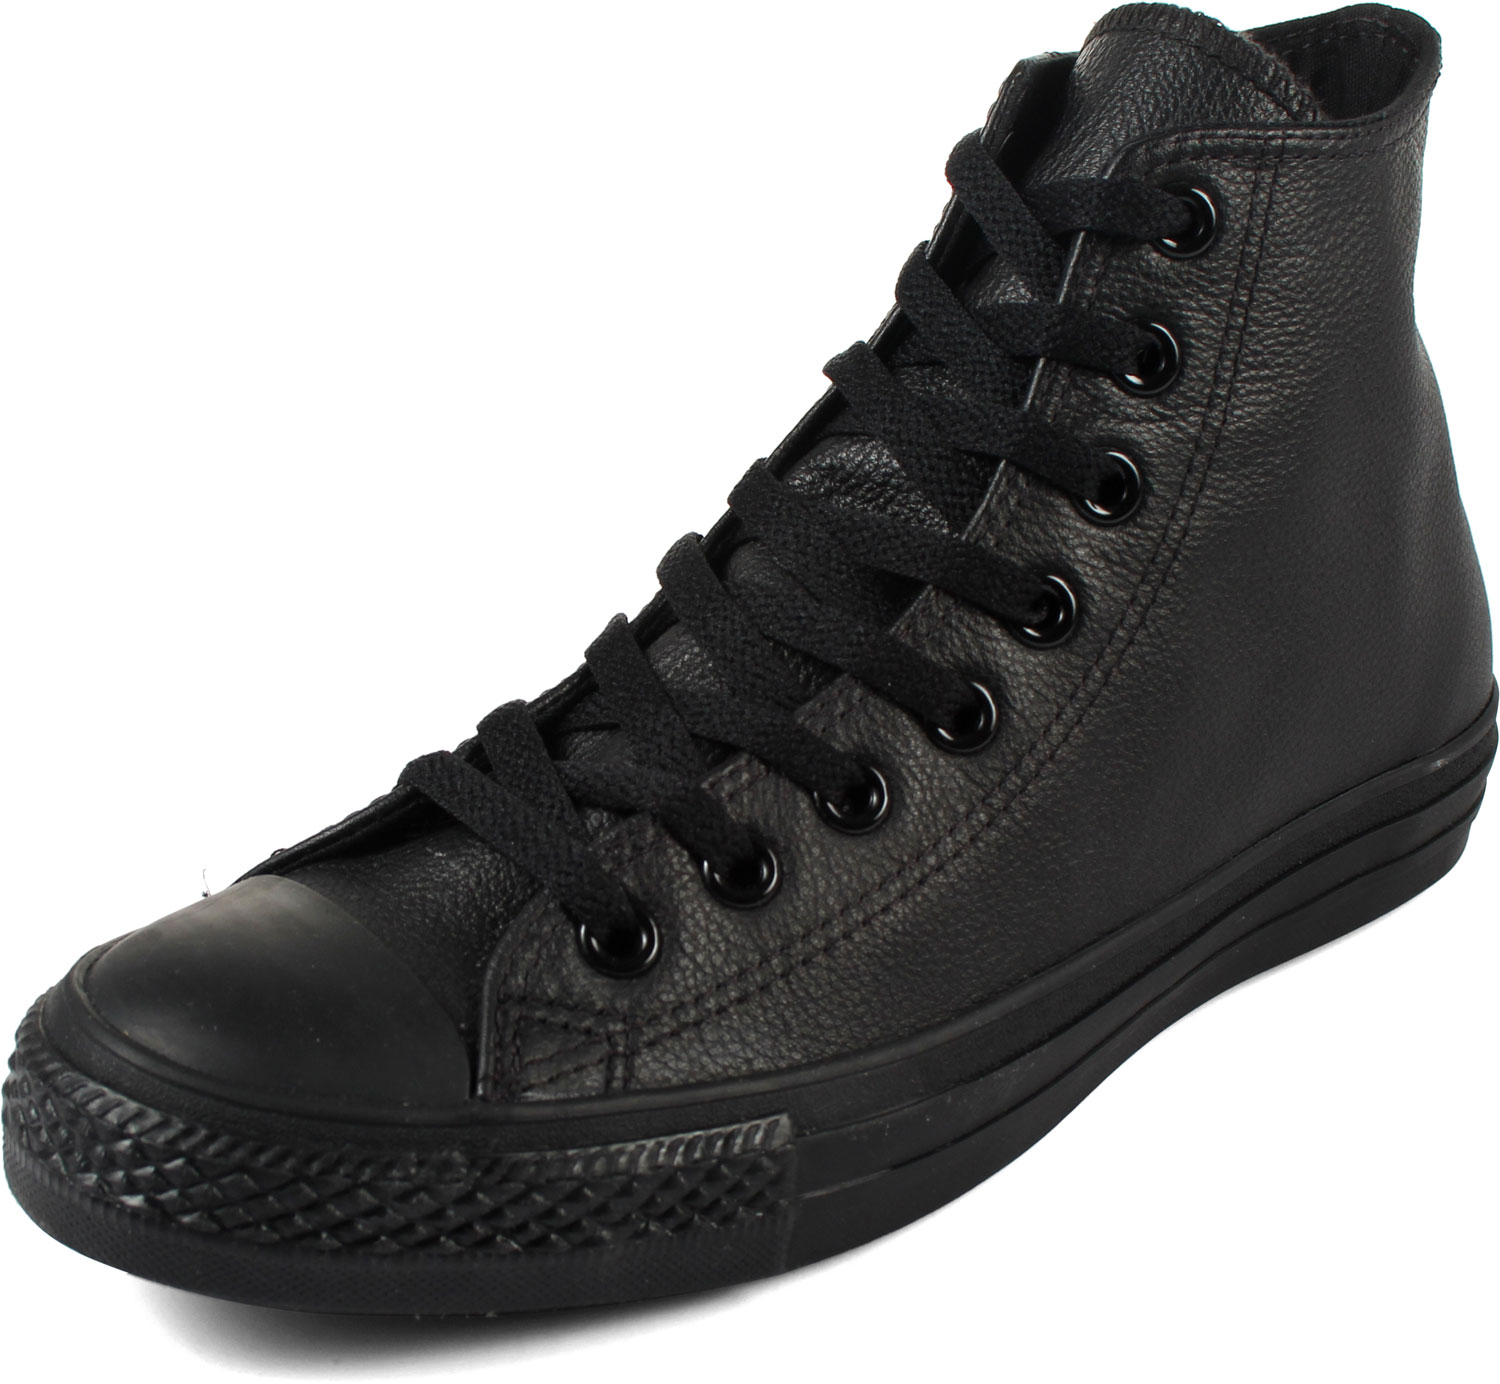 black leather converse sneakers